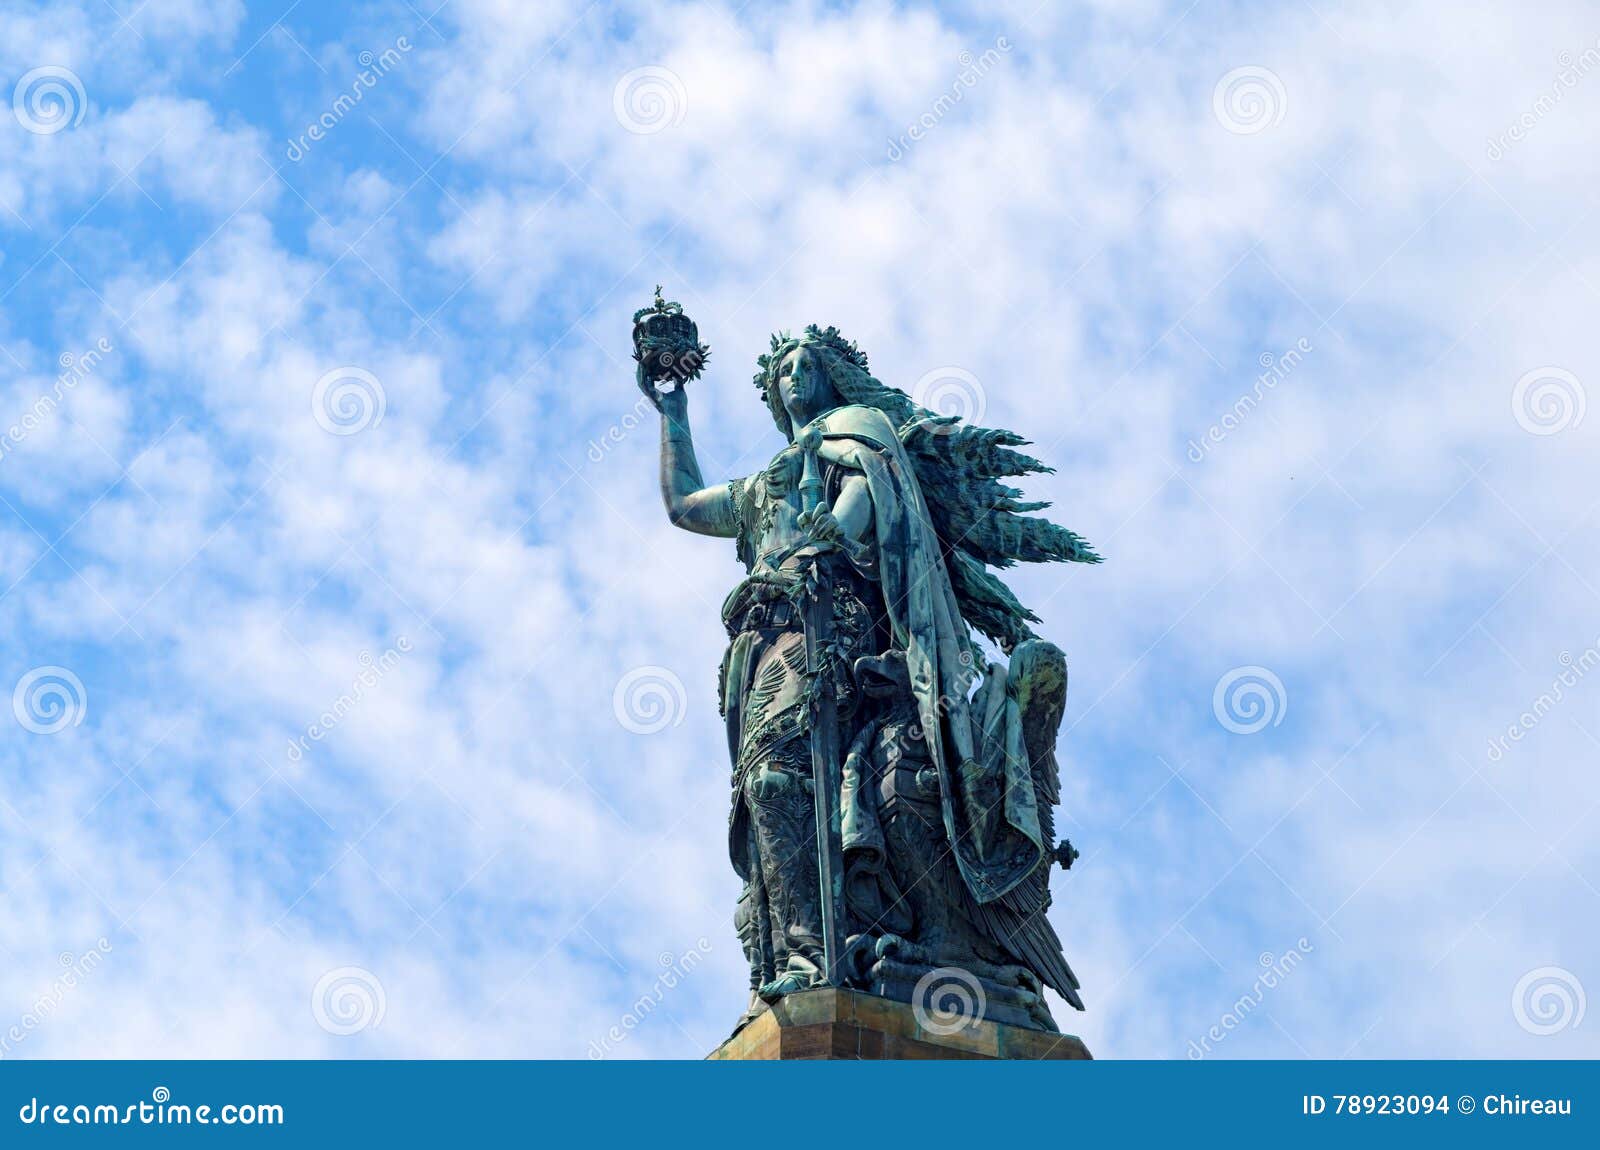 bronze sculpture: germania figure holding the crown of the emperor and the imperial sword